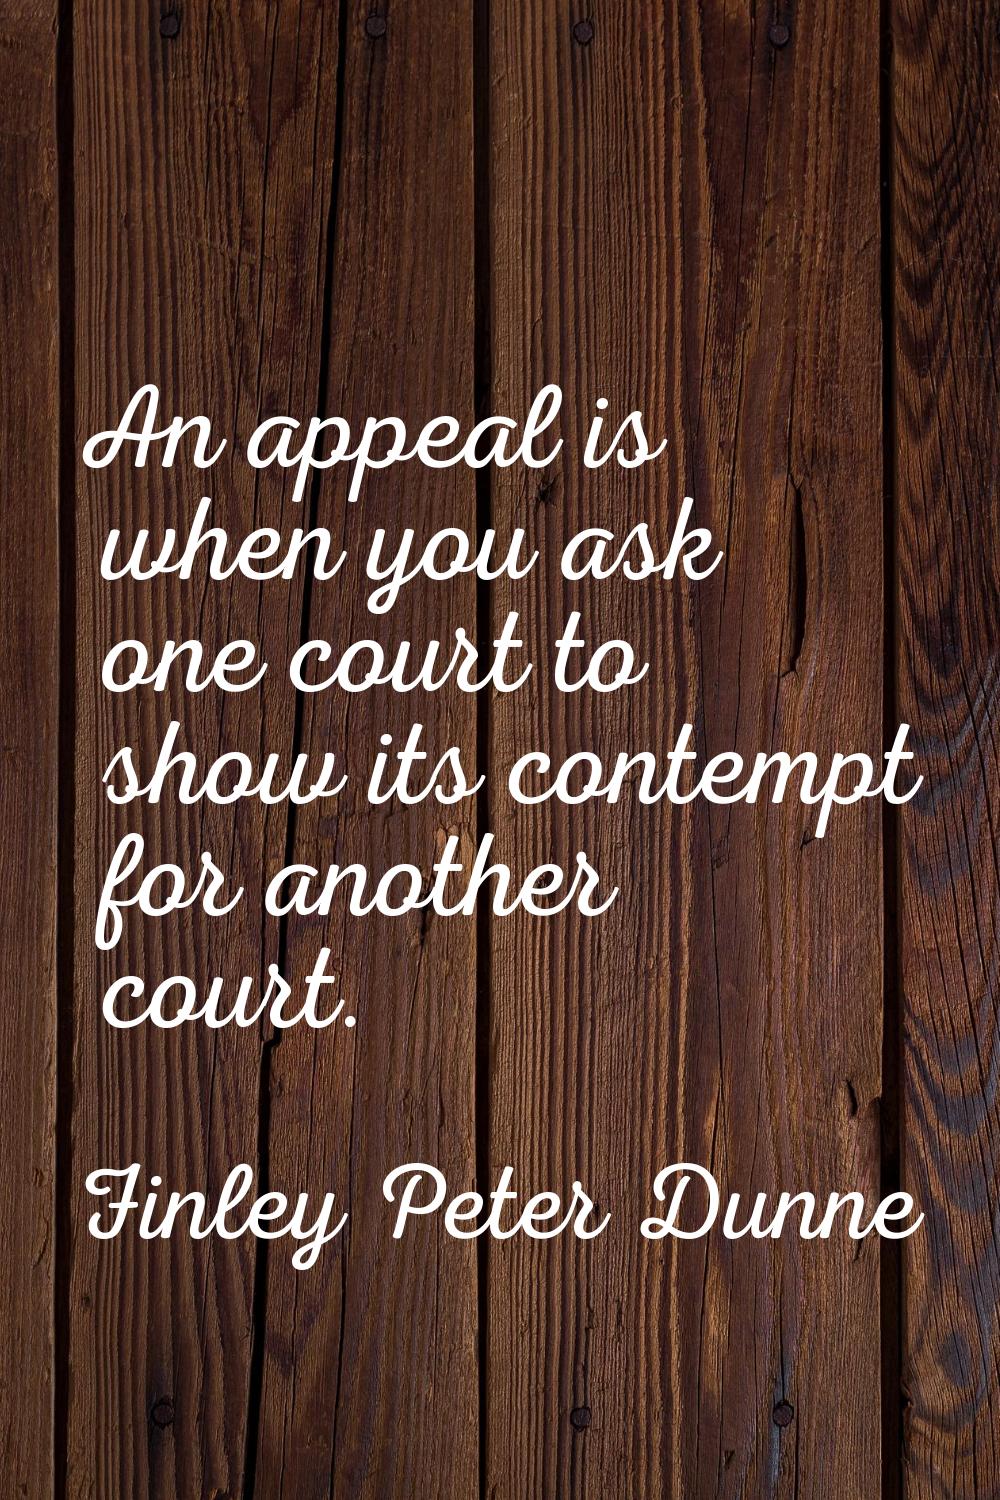 An appeal is when you ask one court to show its contempt for another court.